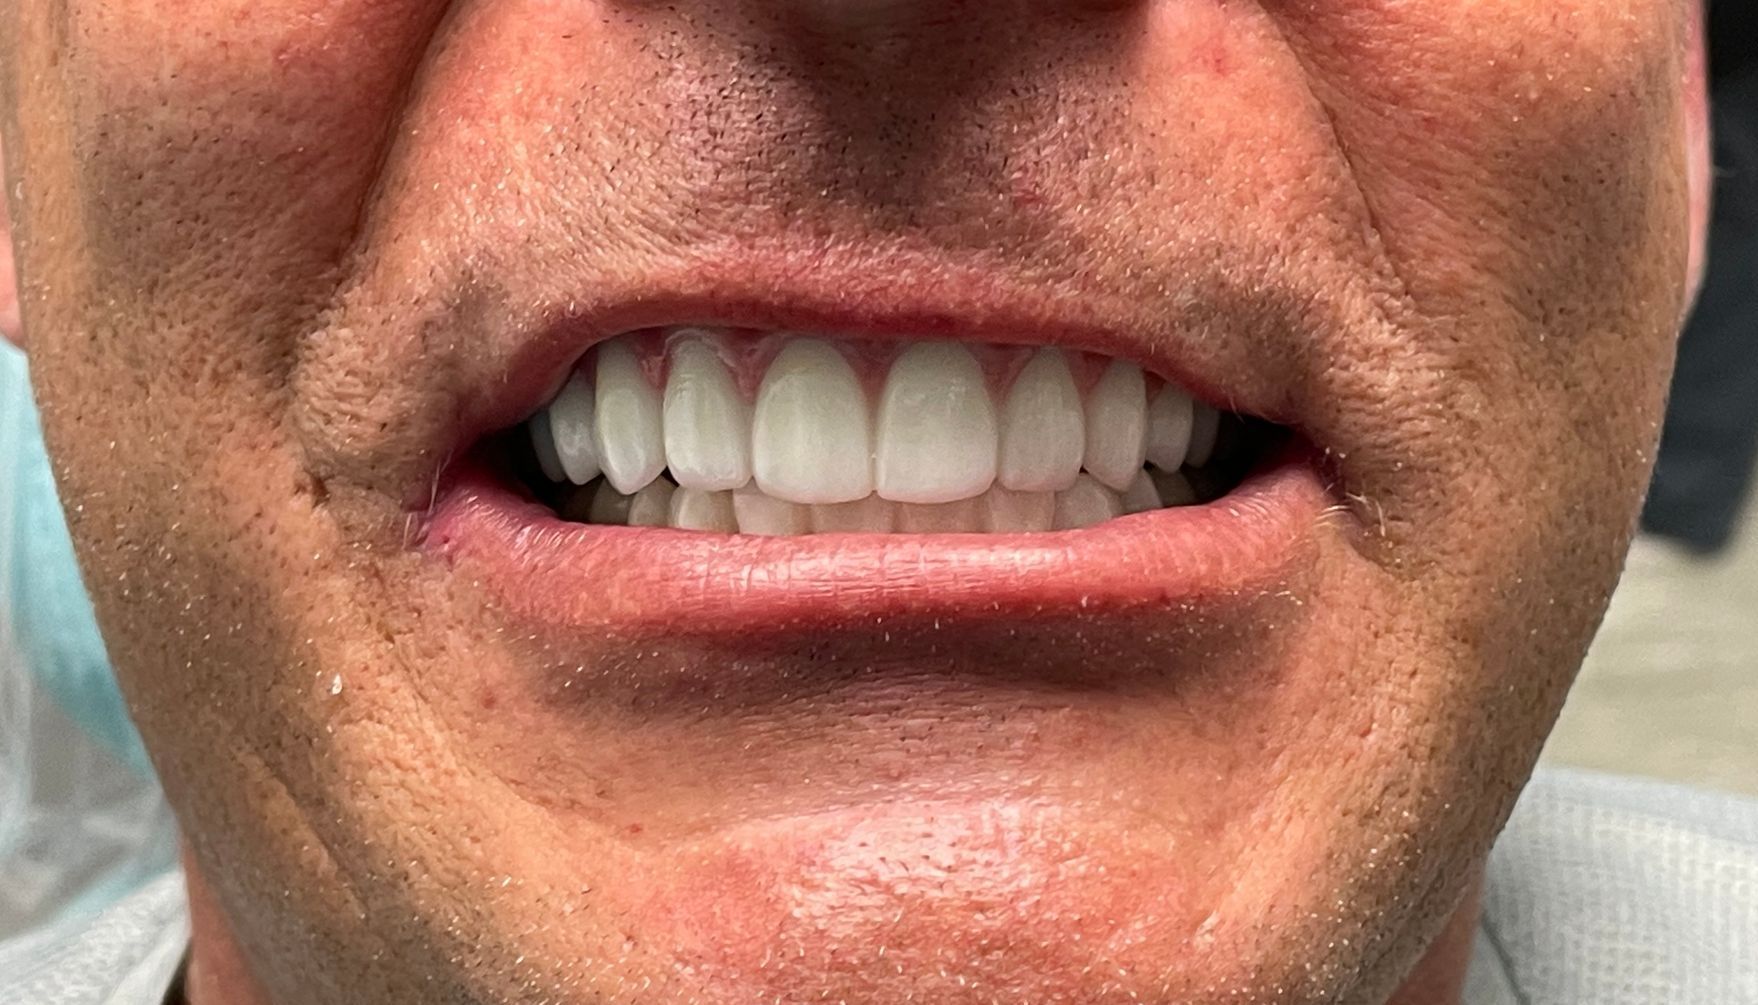 a close up of a man 's mouth with white teeth | All on X - Full Mouth Restoration | Before and After Dental Treatment | Barclay Family Dental | Best Dentist For Family Dentistry, Dental Implants, and Cosmetic Dentistry in Cherry Hill, NJ